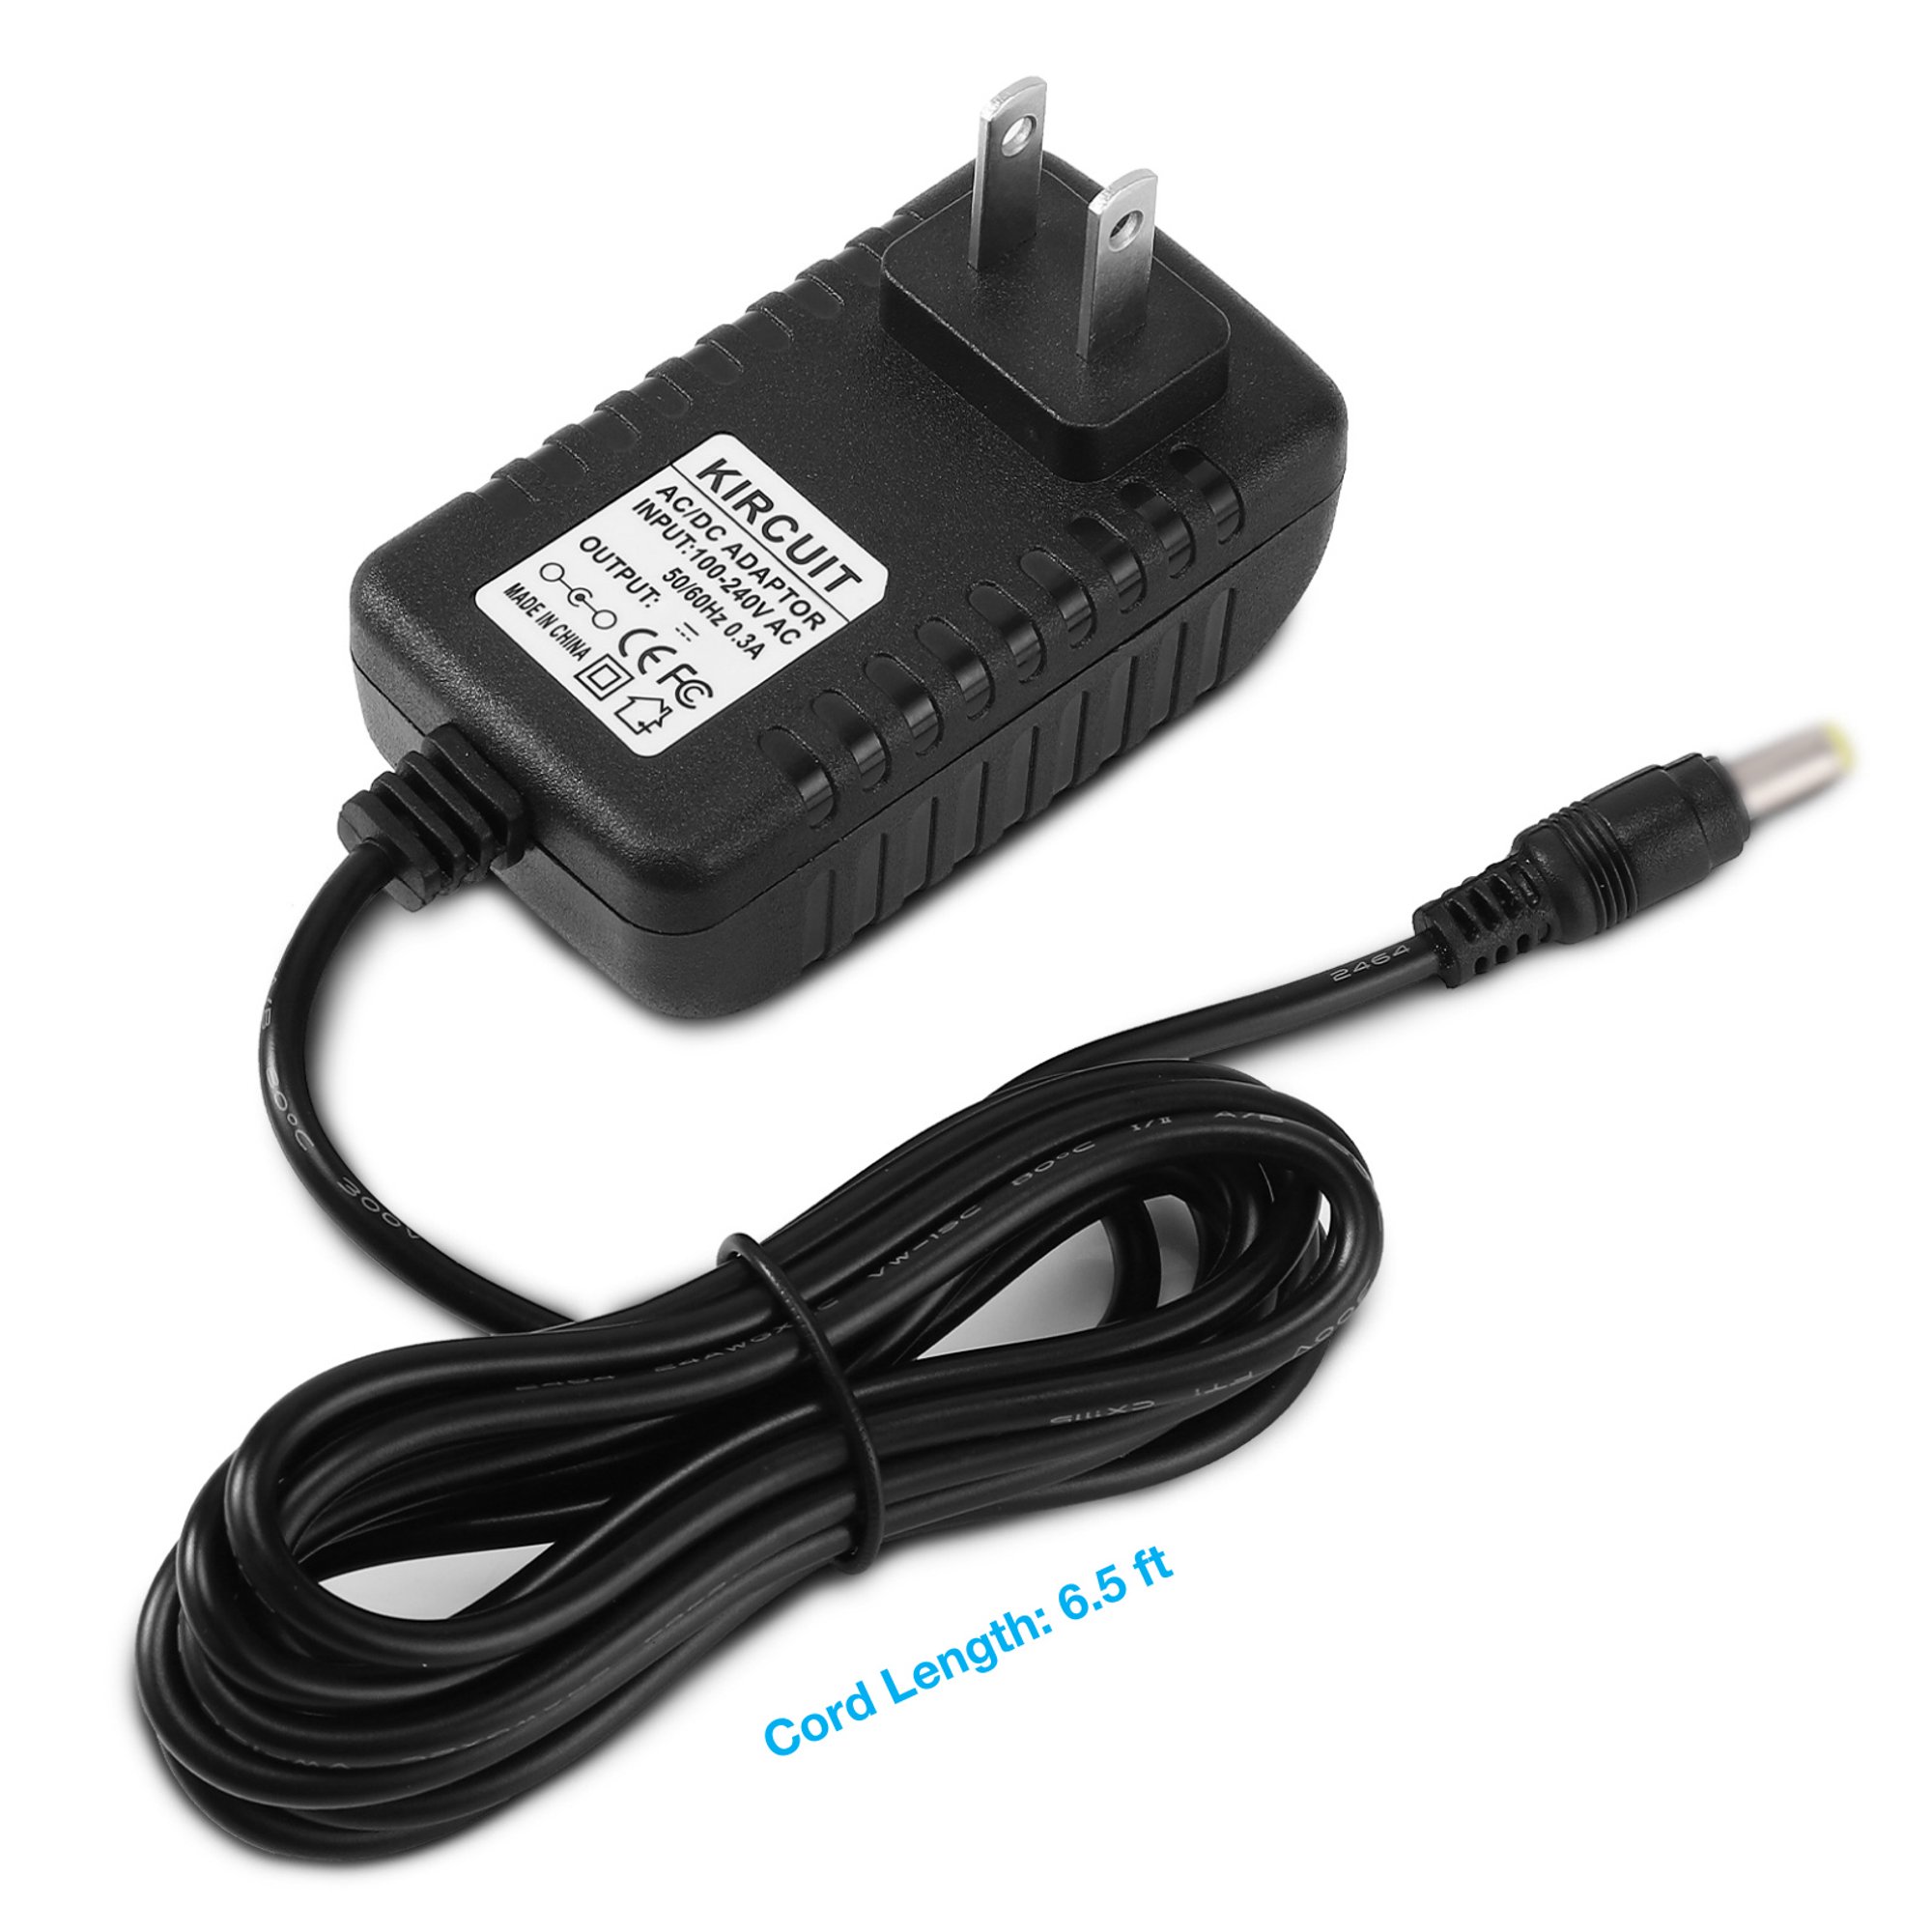 Kircuit New 5V AC/DC Adapter Compatible with Logitech Harmony Adapter PS3 943-000029 (Sony Playstation 3) 5VDC Power Supply Cord Cable PS Wall Home Battery Charger Mains PSU - image 3 of 4